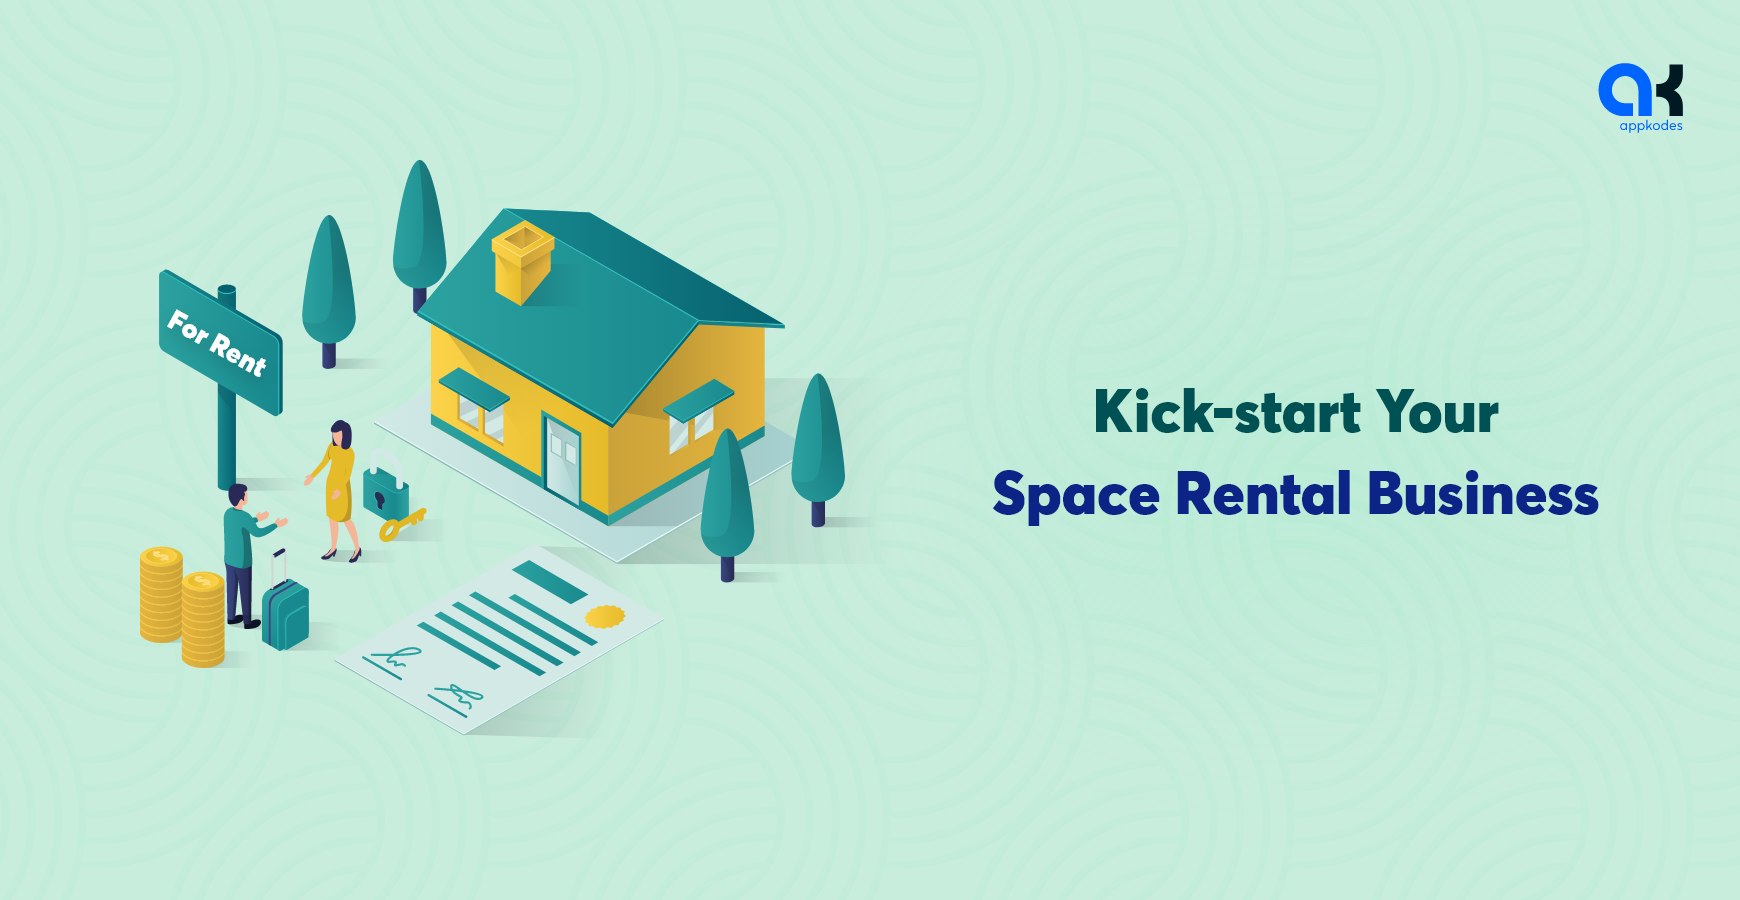 Kick-Start Your Space Rental Business